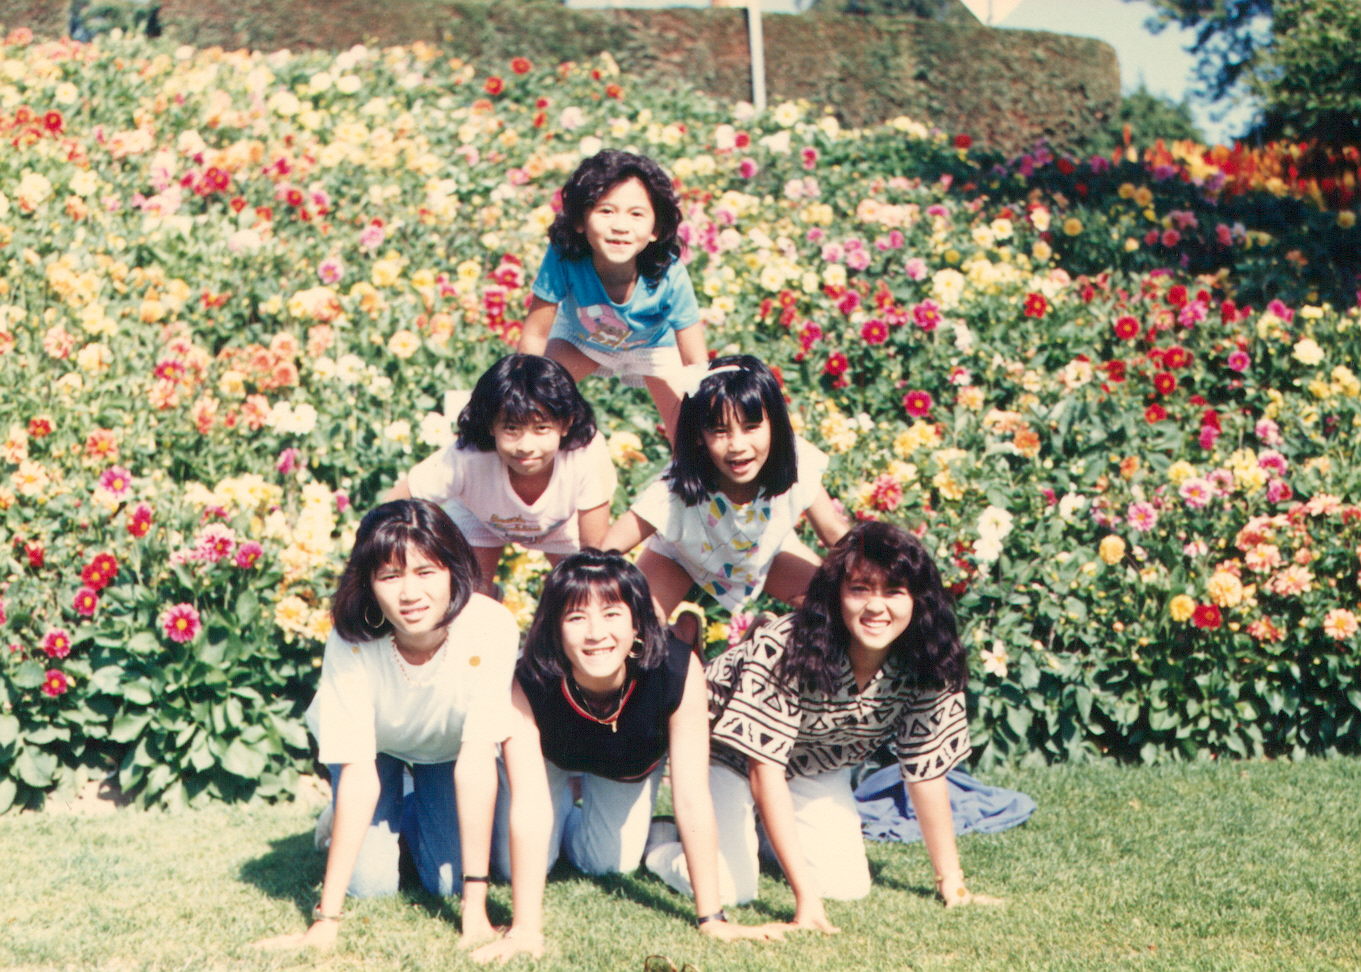 The Buth kids forming a pyramid, Vancouver Canada summer of 1987.